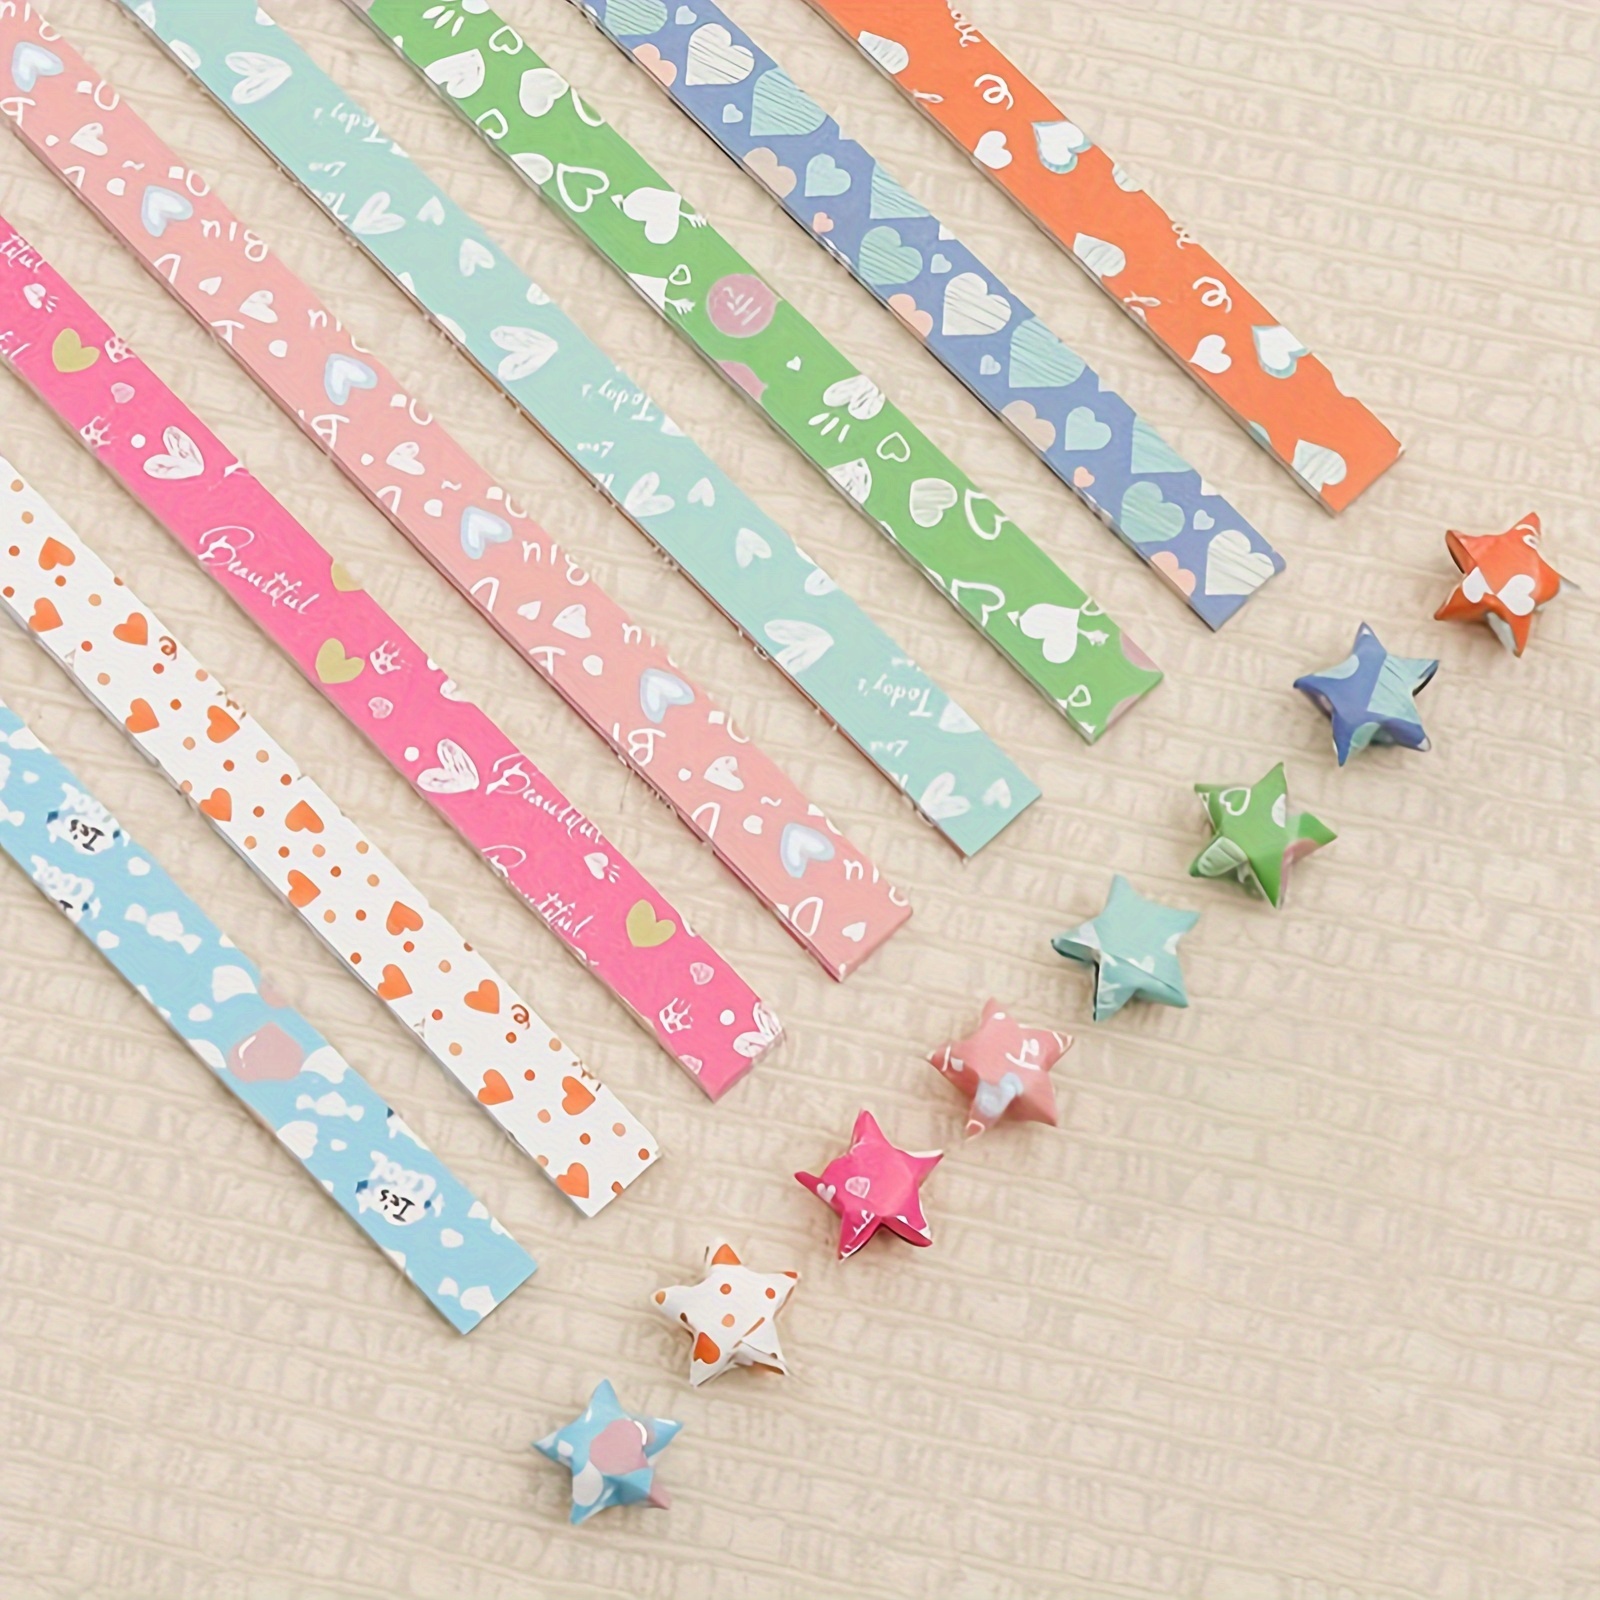  Star Paper, Origami Paper, Quilling Paper, Paper Stars, Paper  Star Strips, Star Paper Strips, Paper Star Paper, Origami Star Paper,  Origami Star Strips, Origami Star Paper Strips (540 Sheets,D)